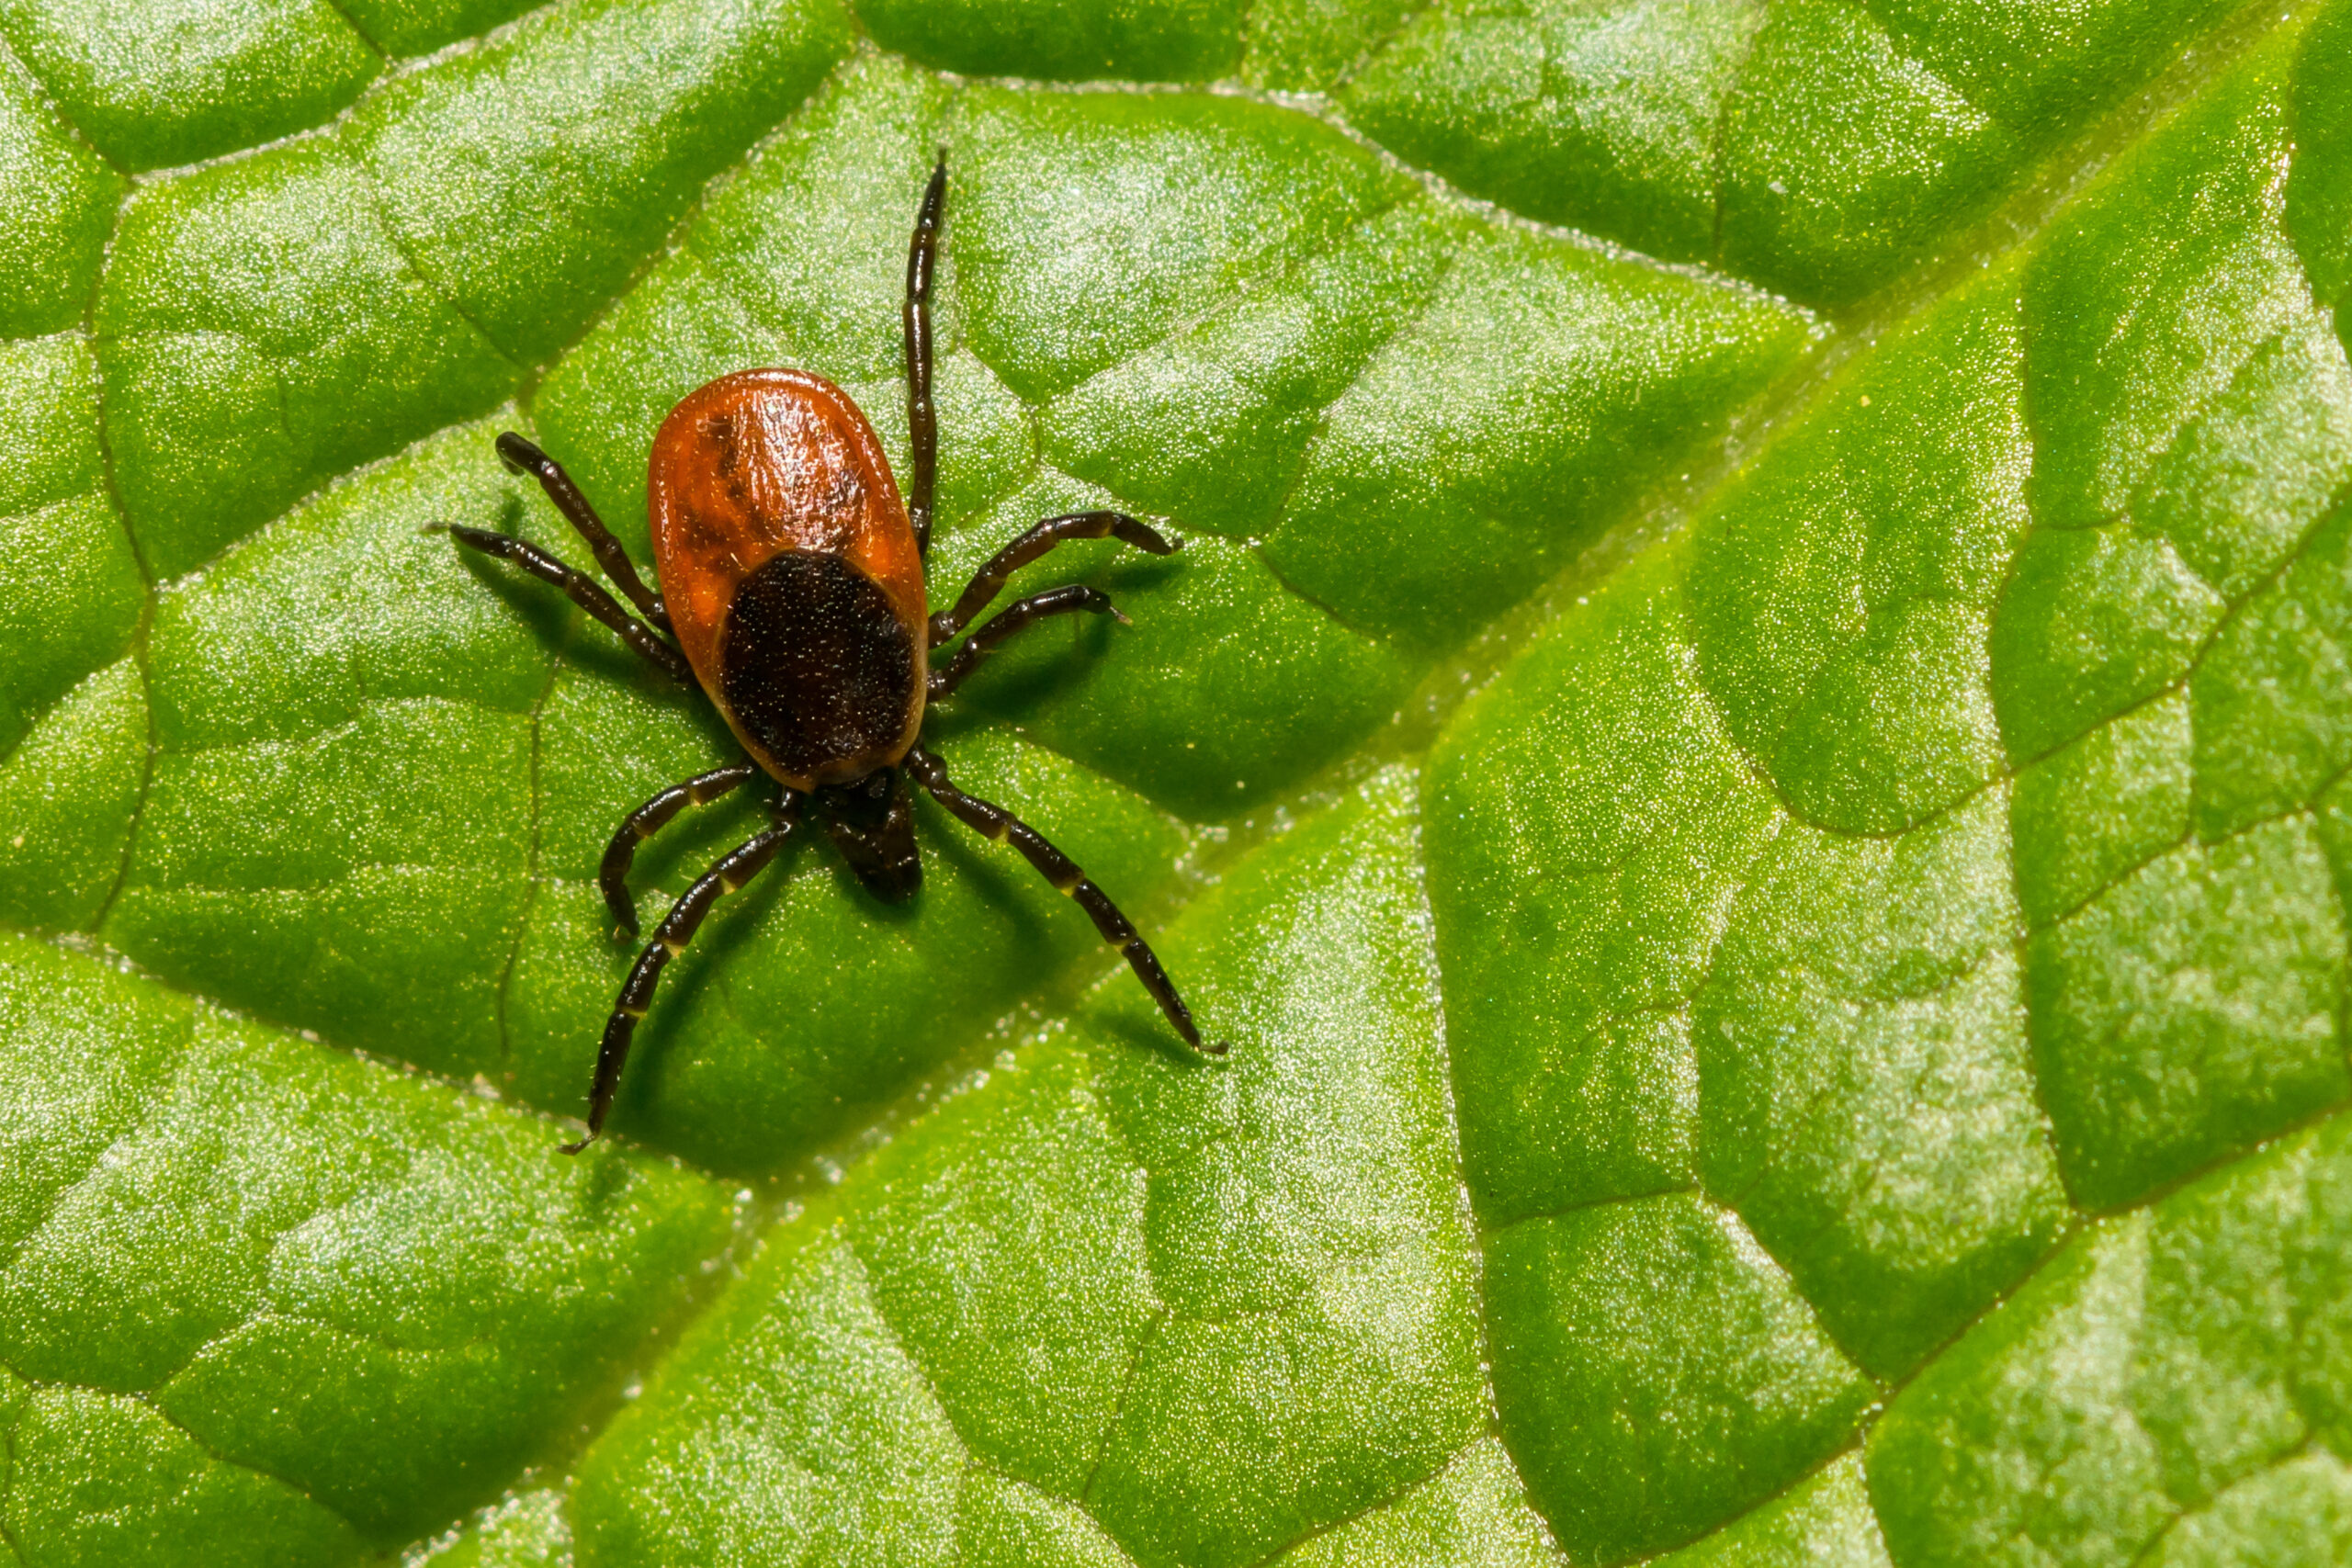 If they are large enough for the naked eye to see, adult blacklegged ticks and lone star ticks have distinctive features. The adult female lone star tick is one of the most recognizable, with the trademark white dot on their backs, while adult blacklegged ticks have reddish-brown bodies and a black shield on their backs.